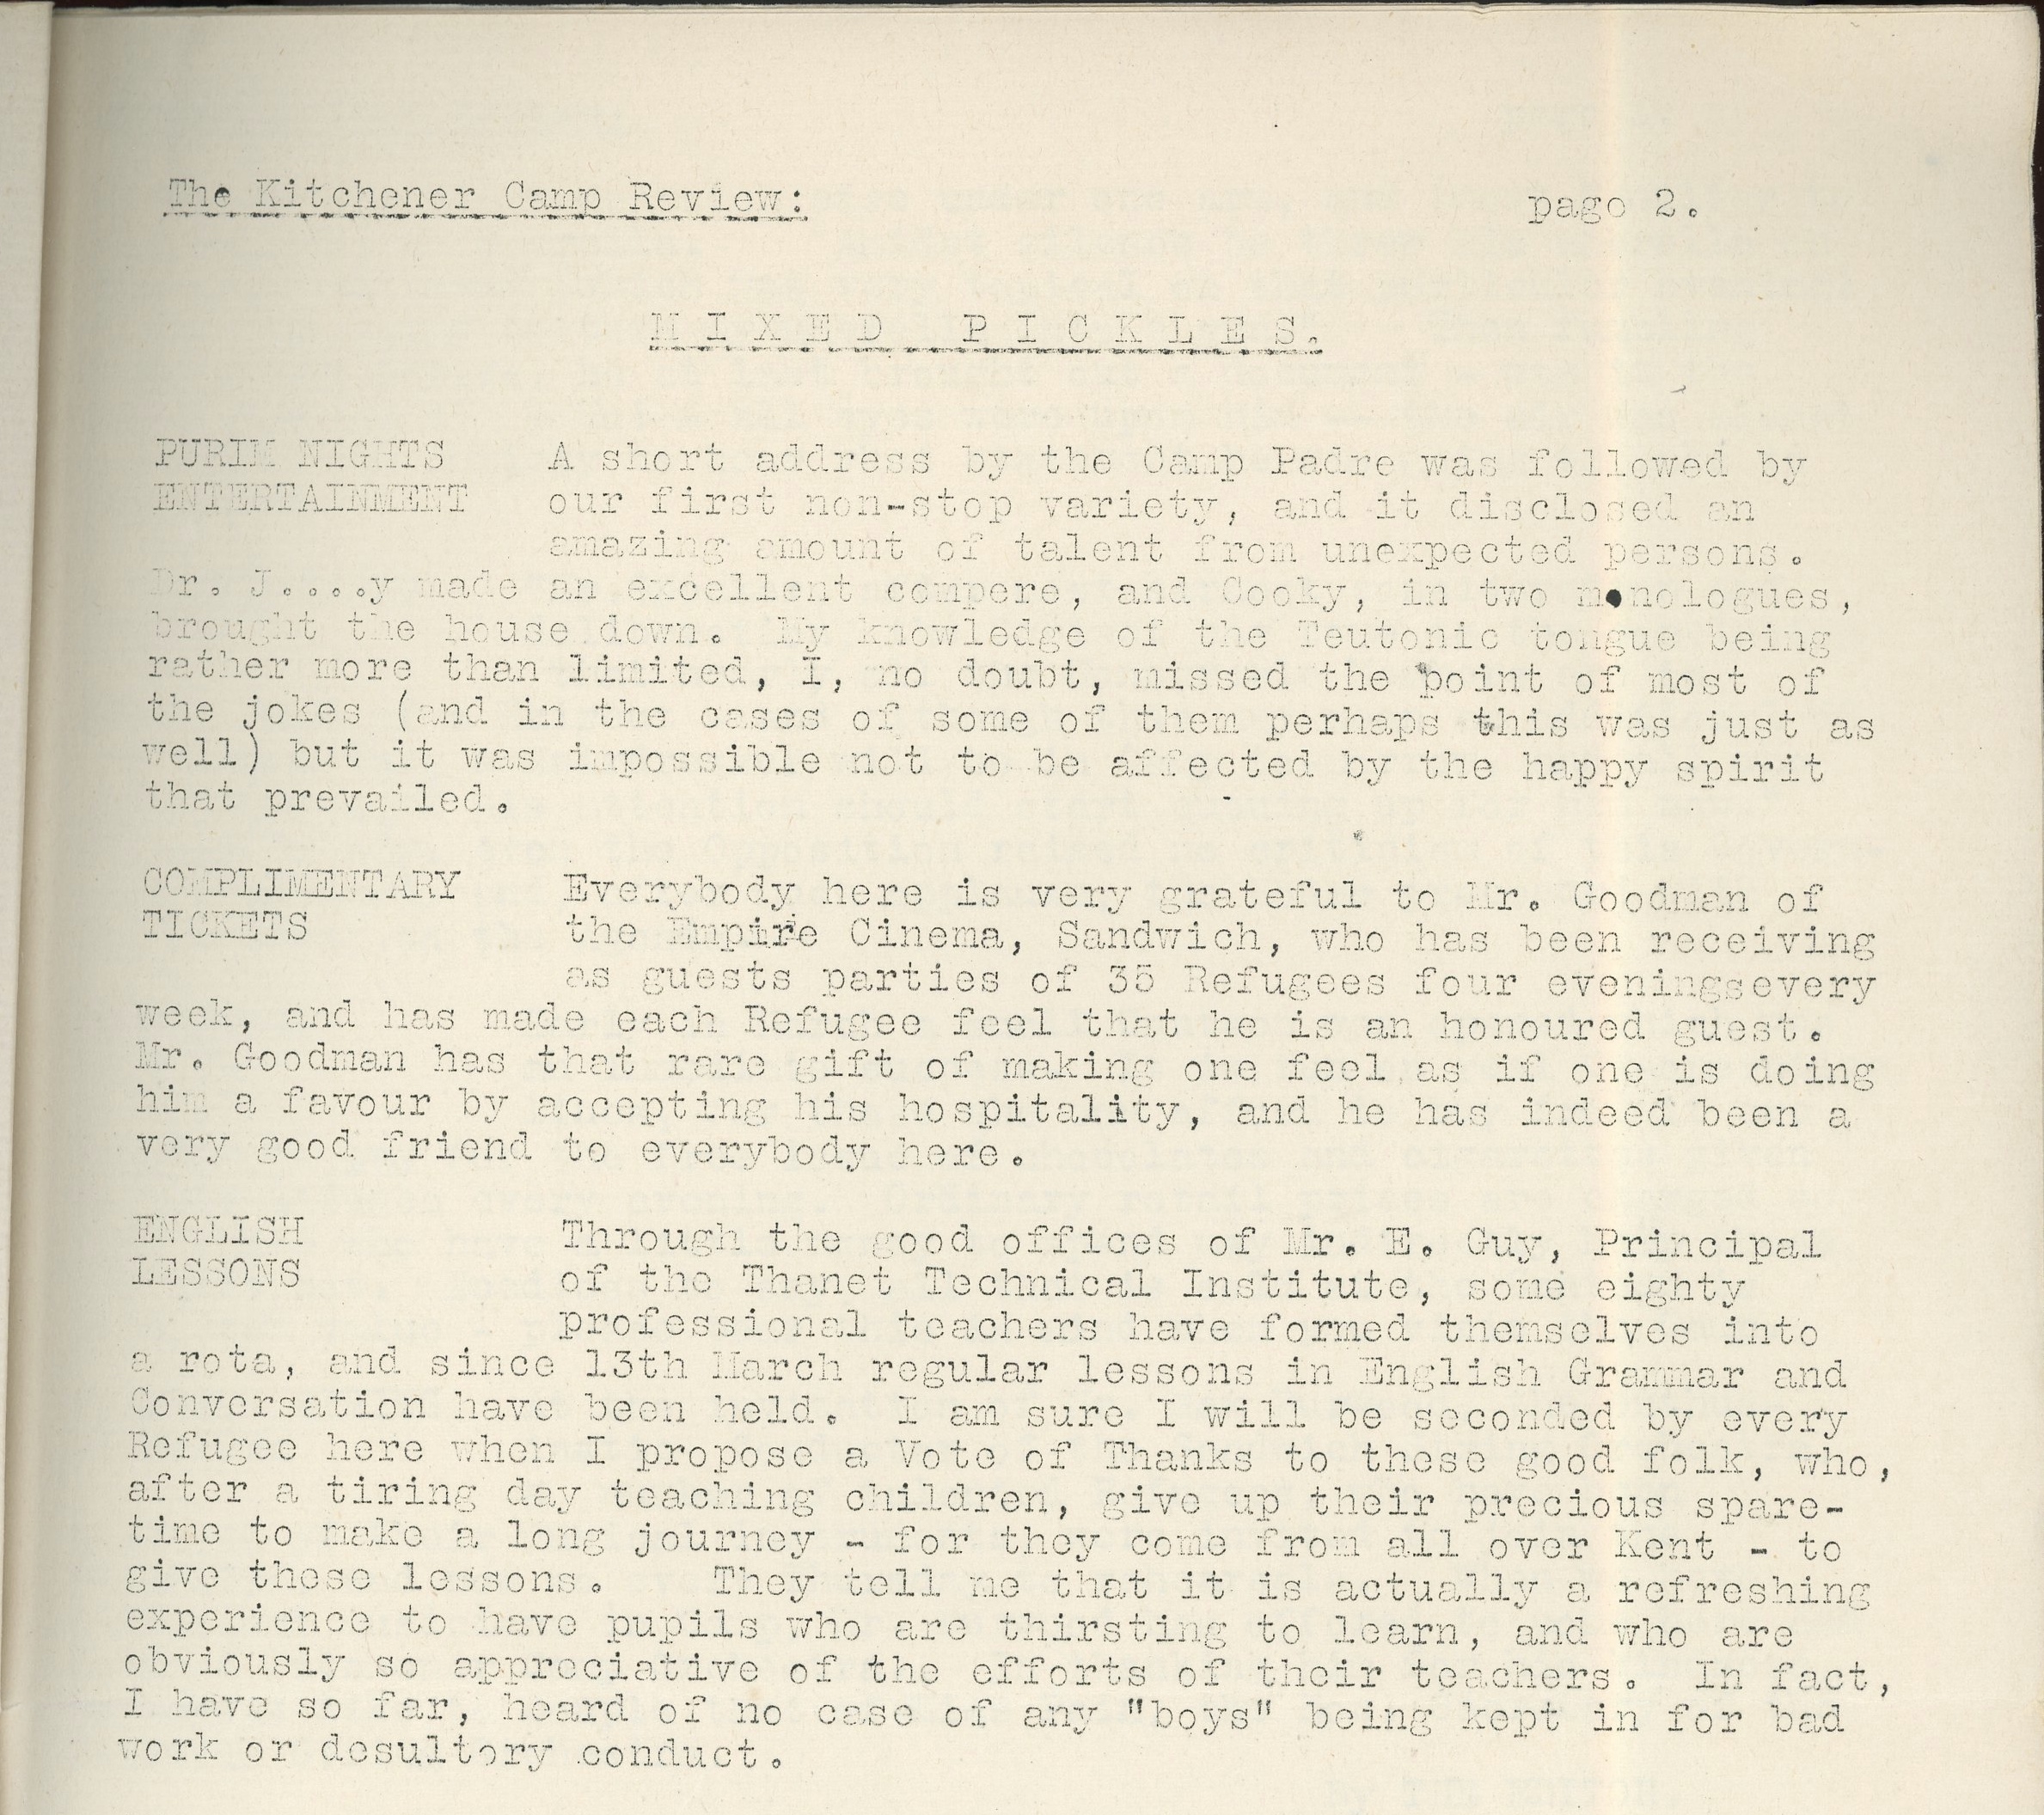 Kitchener Camp Review, April 1939, page 2, top